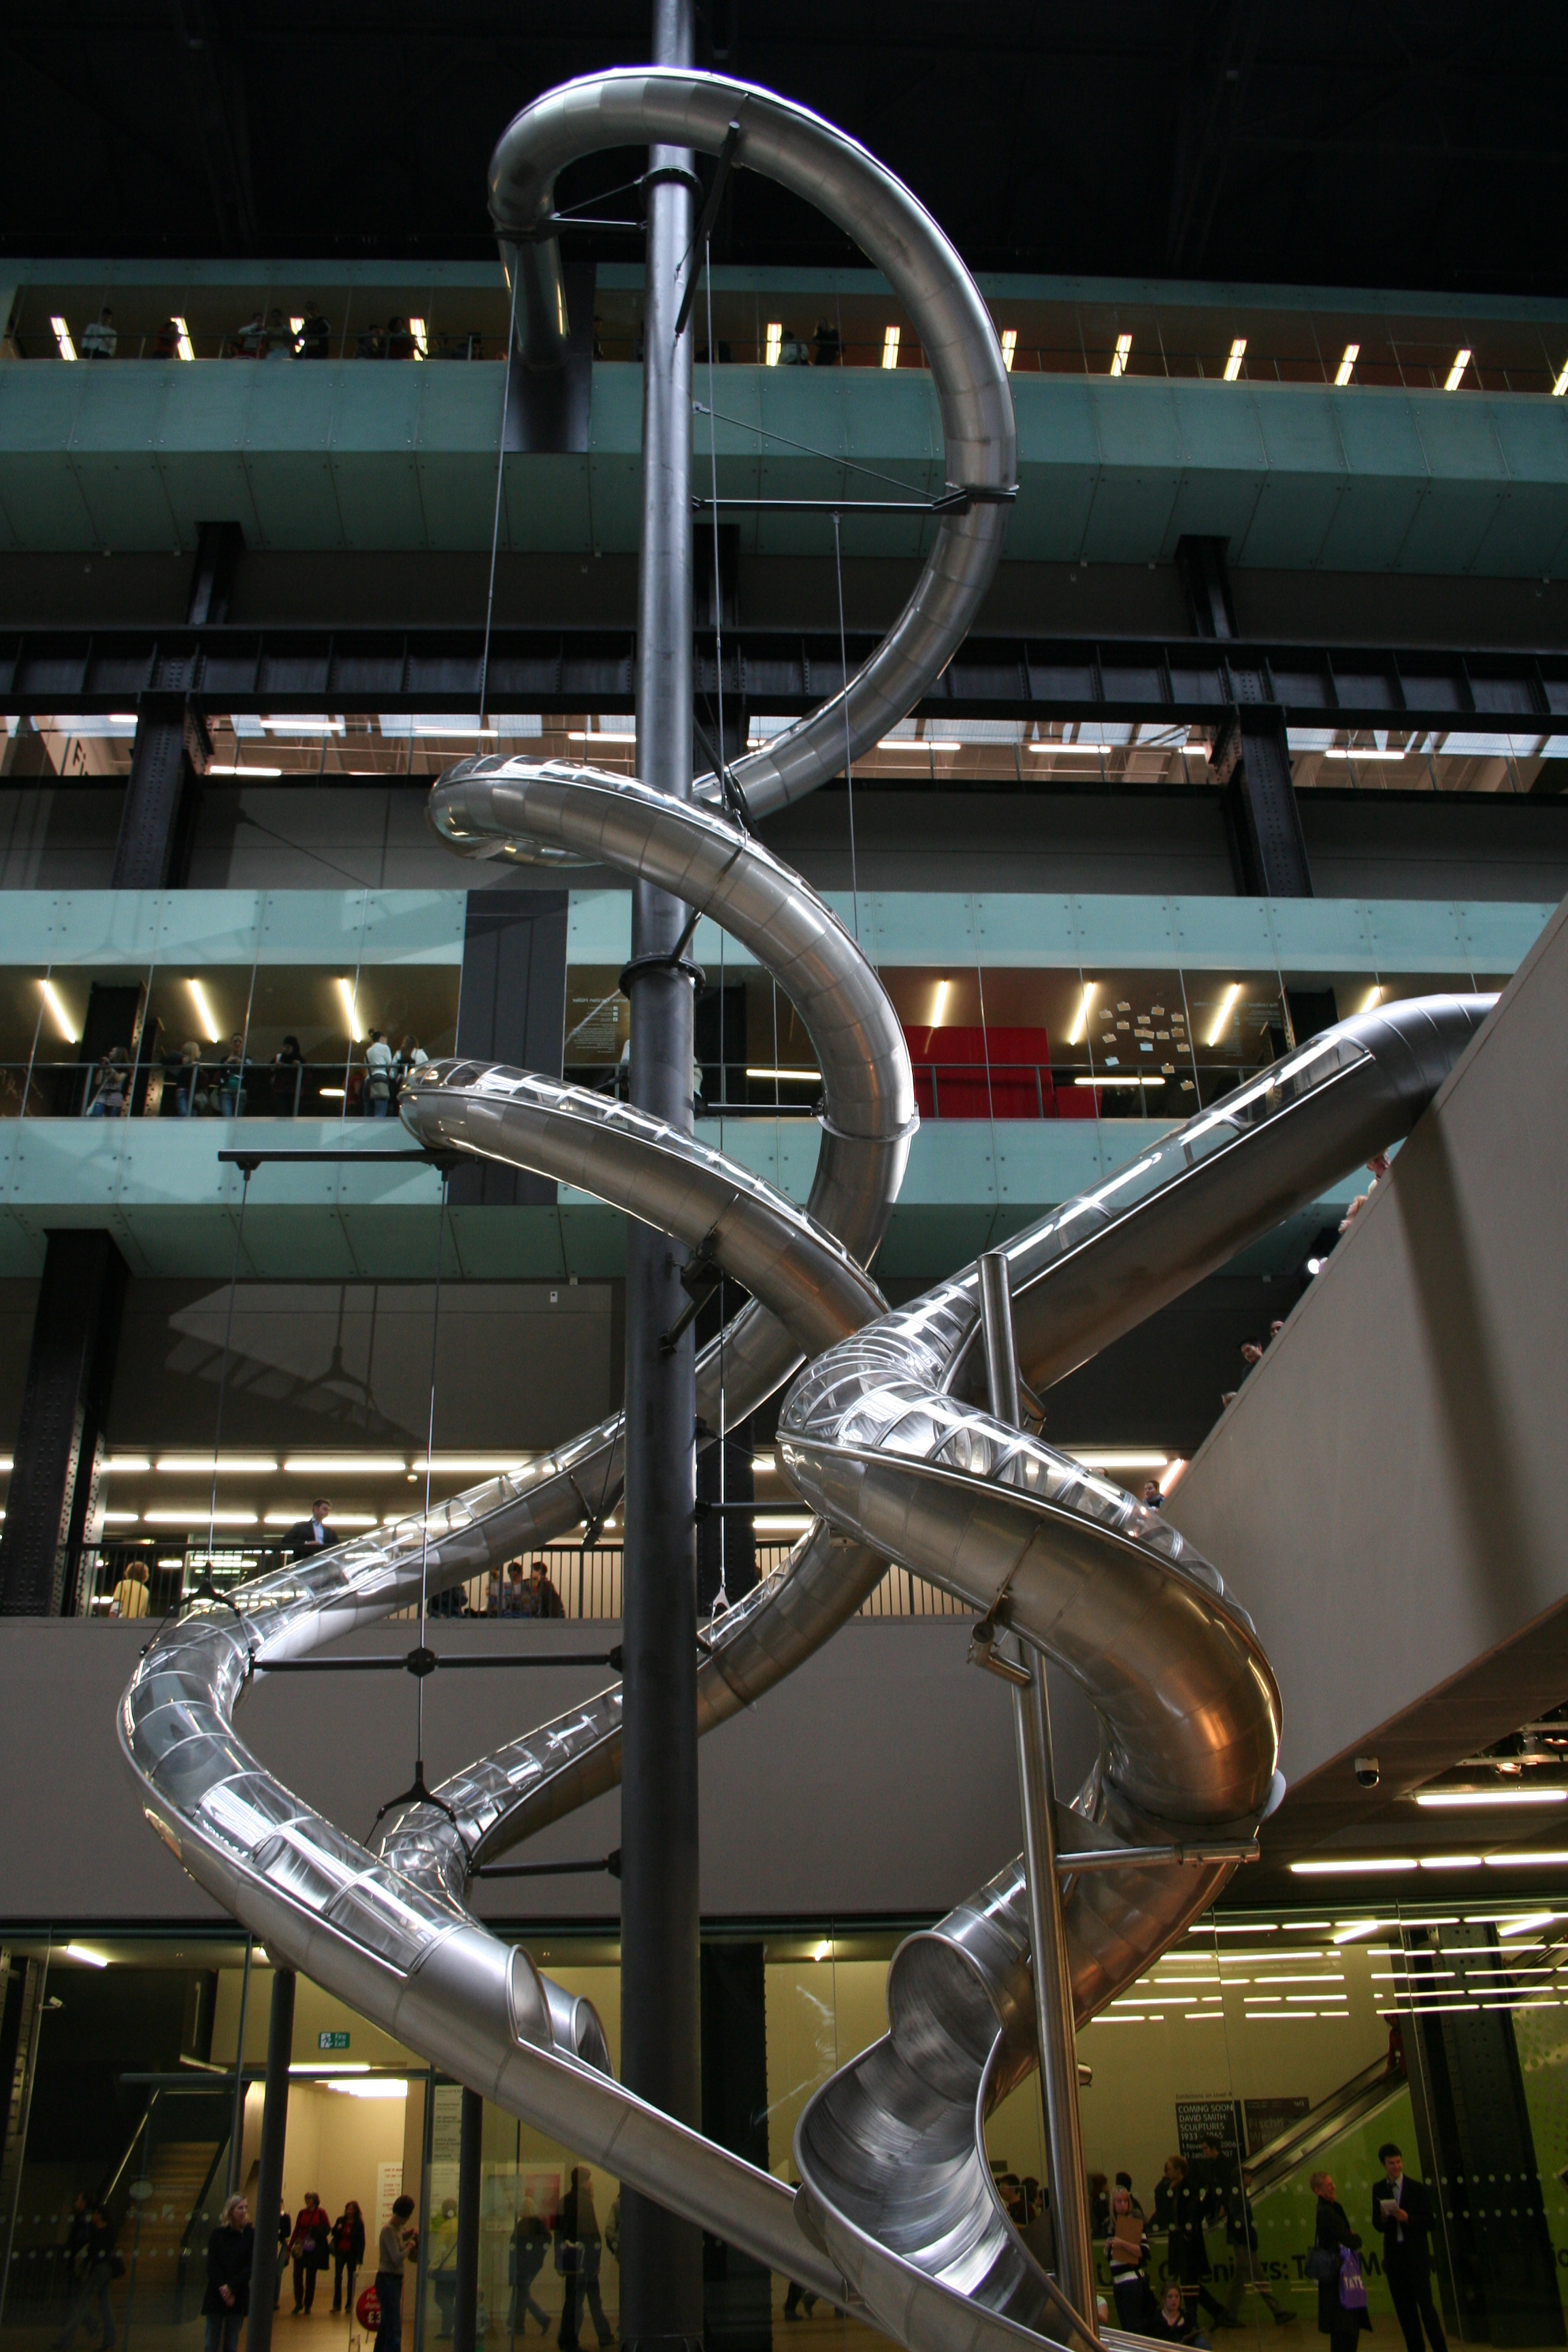 Carsten Höller's slides: A fun way to experience museums